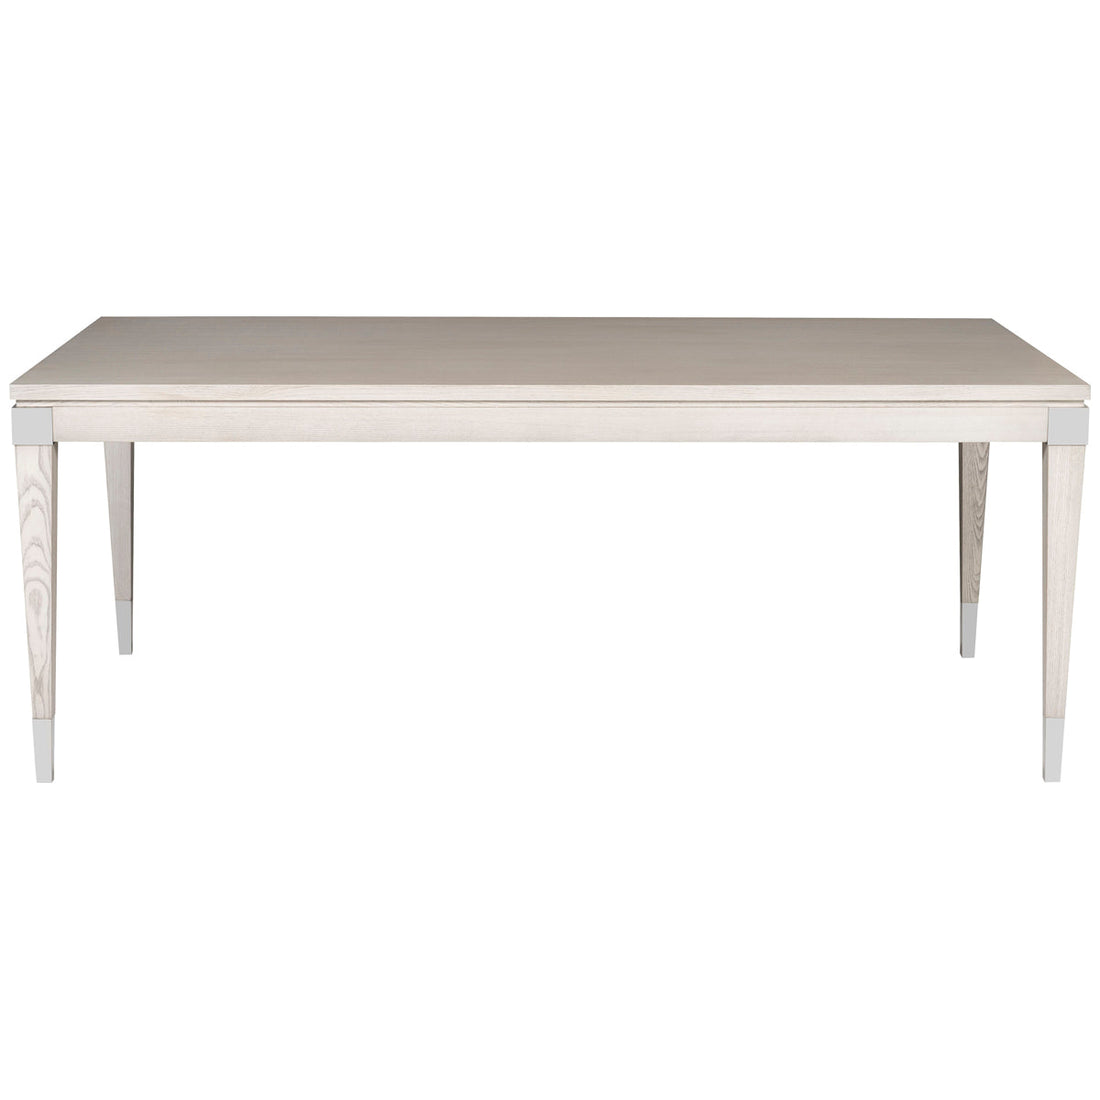 Vanguard Furniture Wood Tapered Dining Table with Wood Tapered Leg